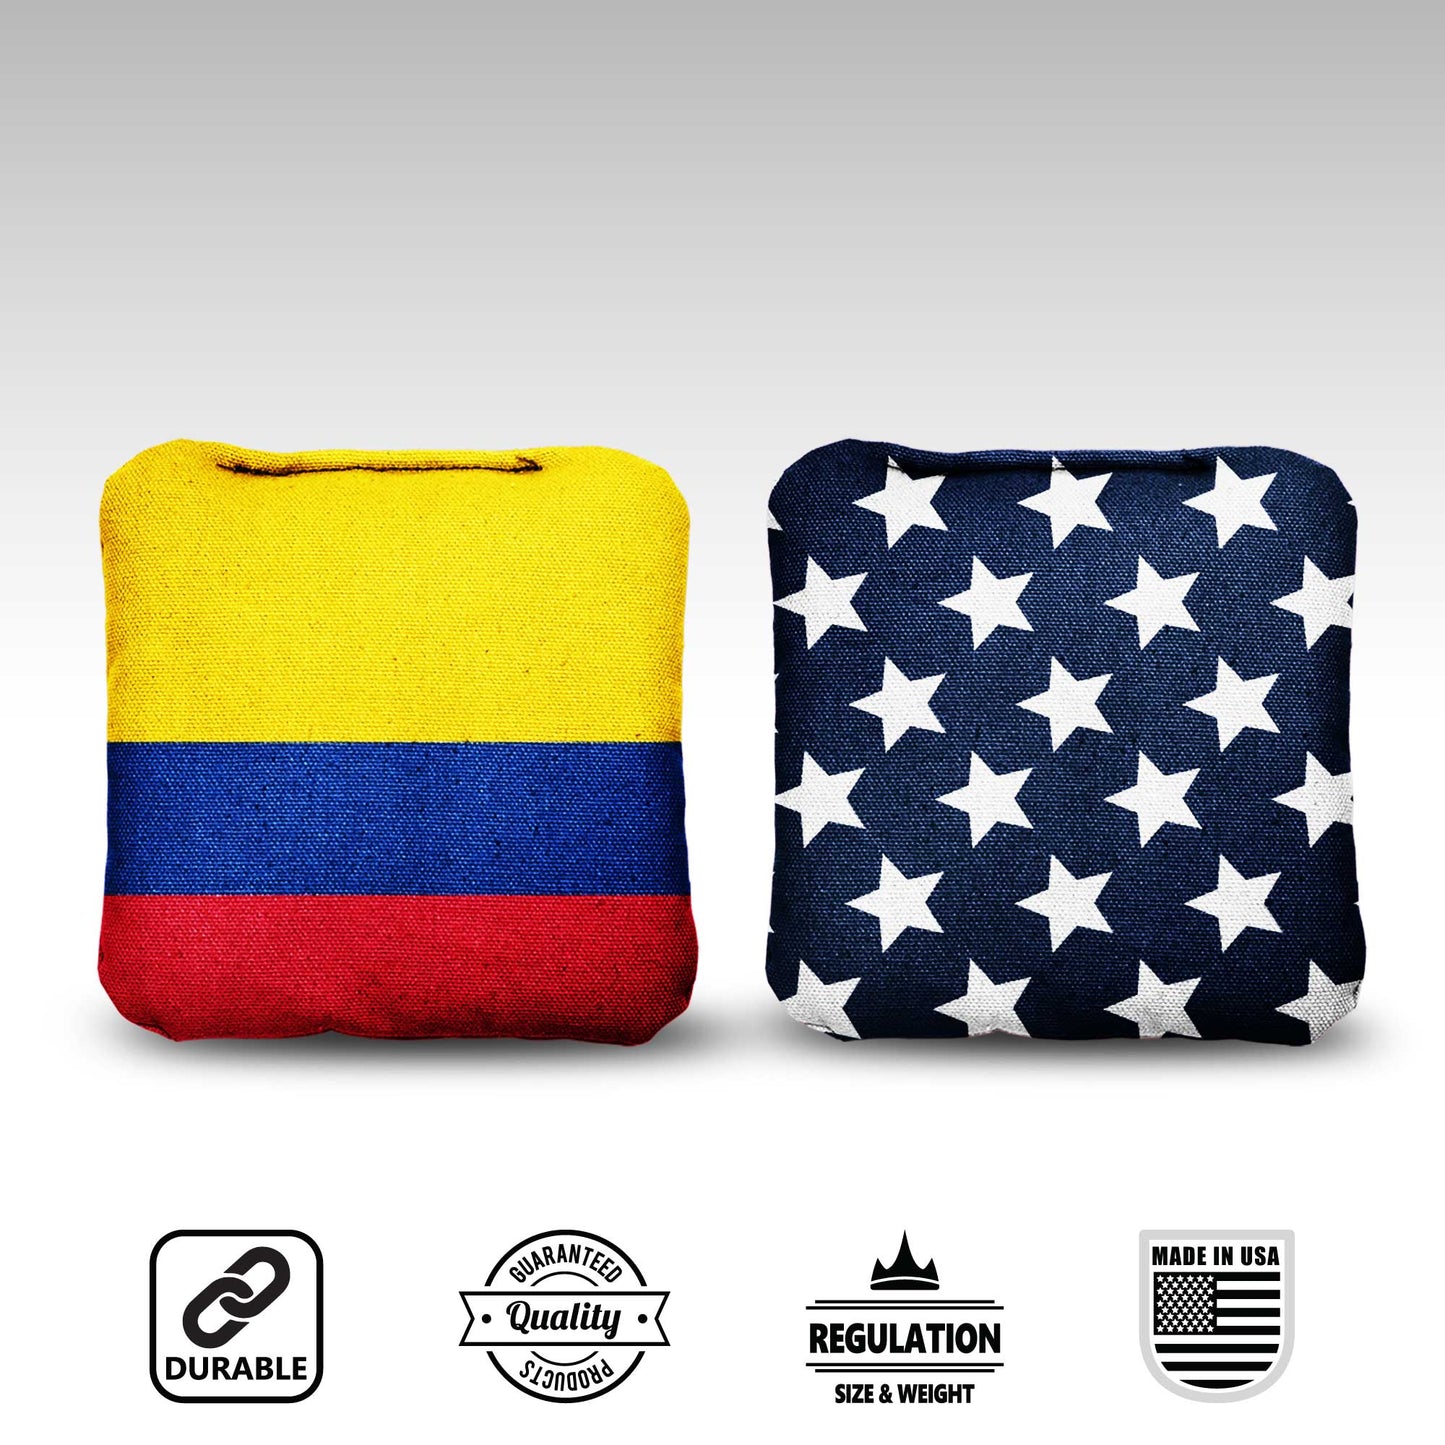 The Columbians and Mericas - 8 Cornhole Bags